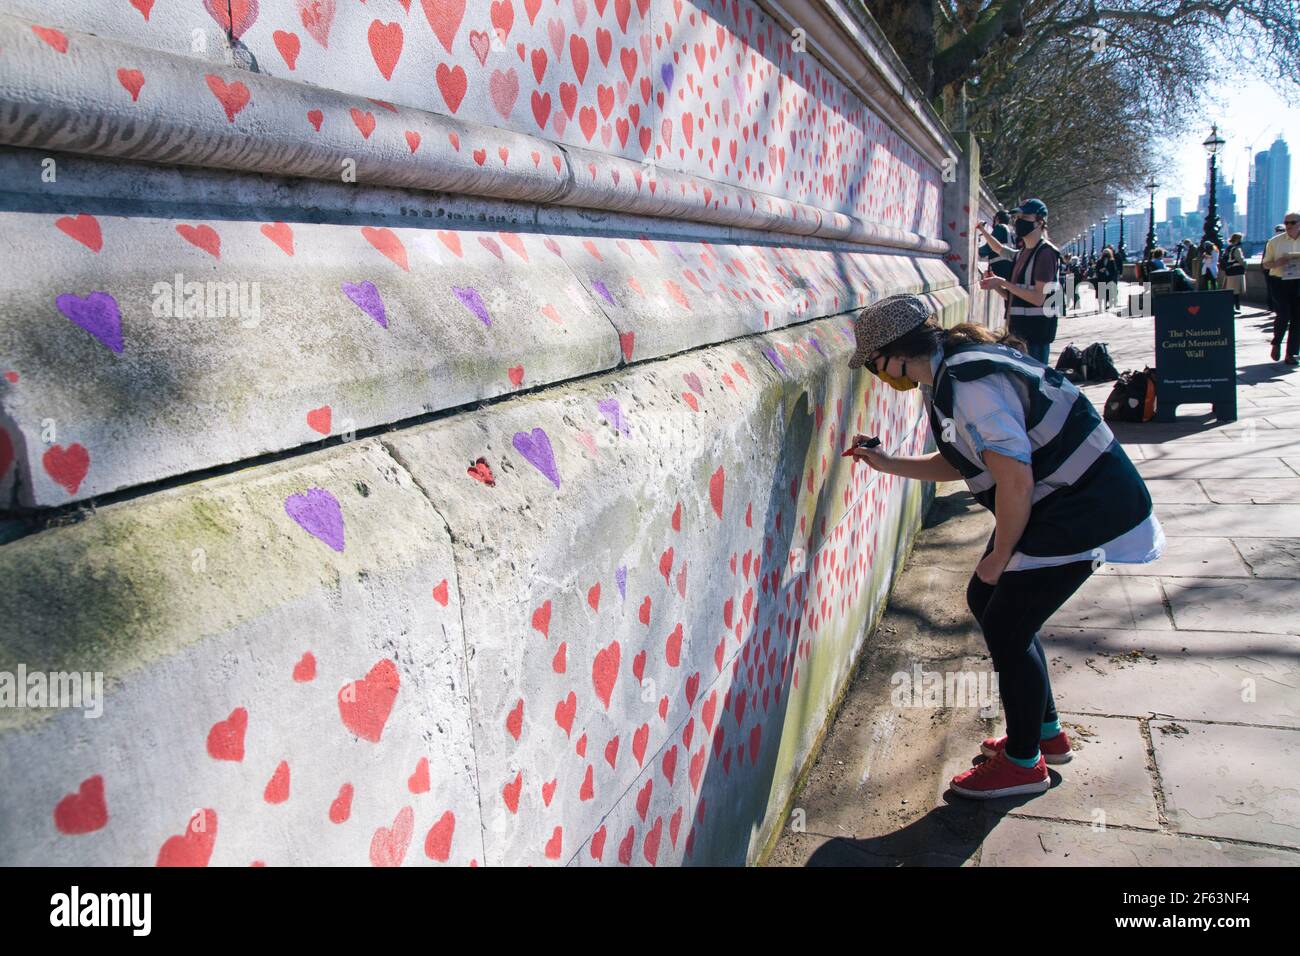 St Thomas's Hospital, London, UK. 29th March 2021. The bereaved and volunteers paint hearts for each person who has died of Covid. Credit: Denise Laura Baker/Alamy Live News Stock Photo